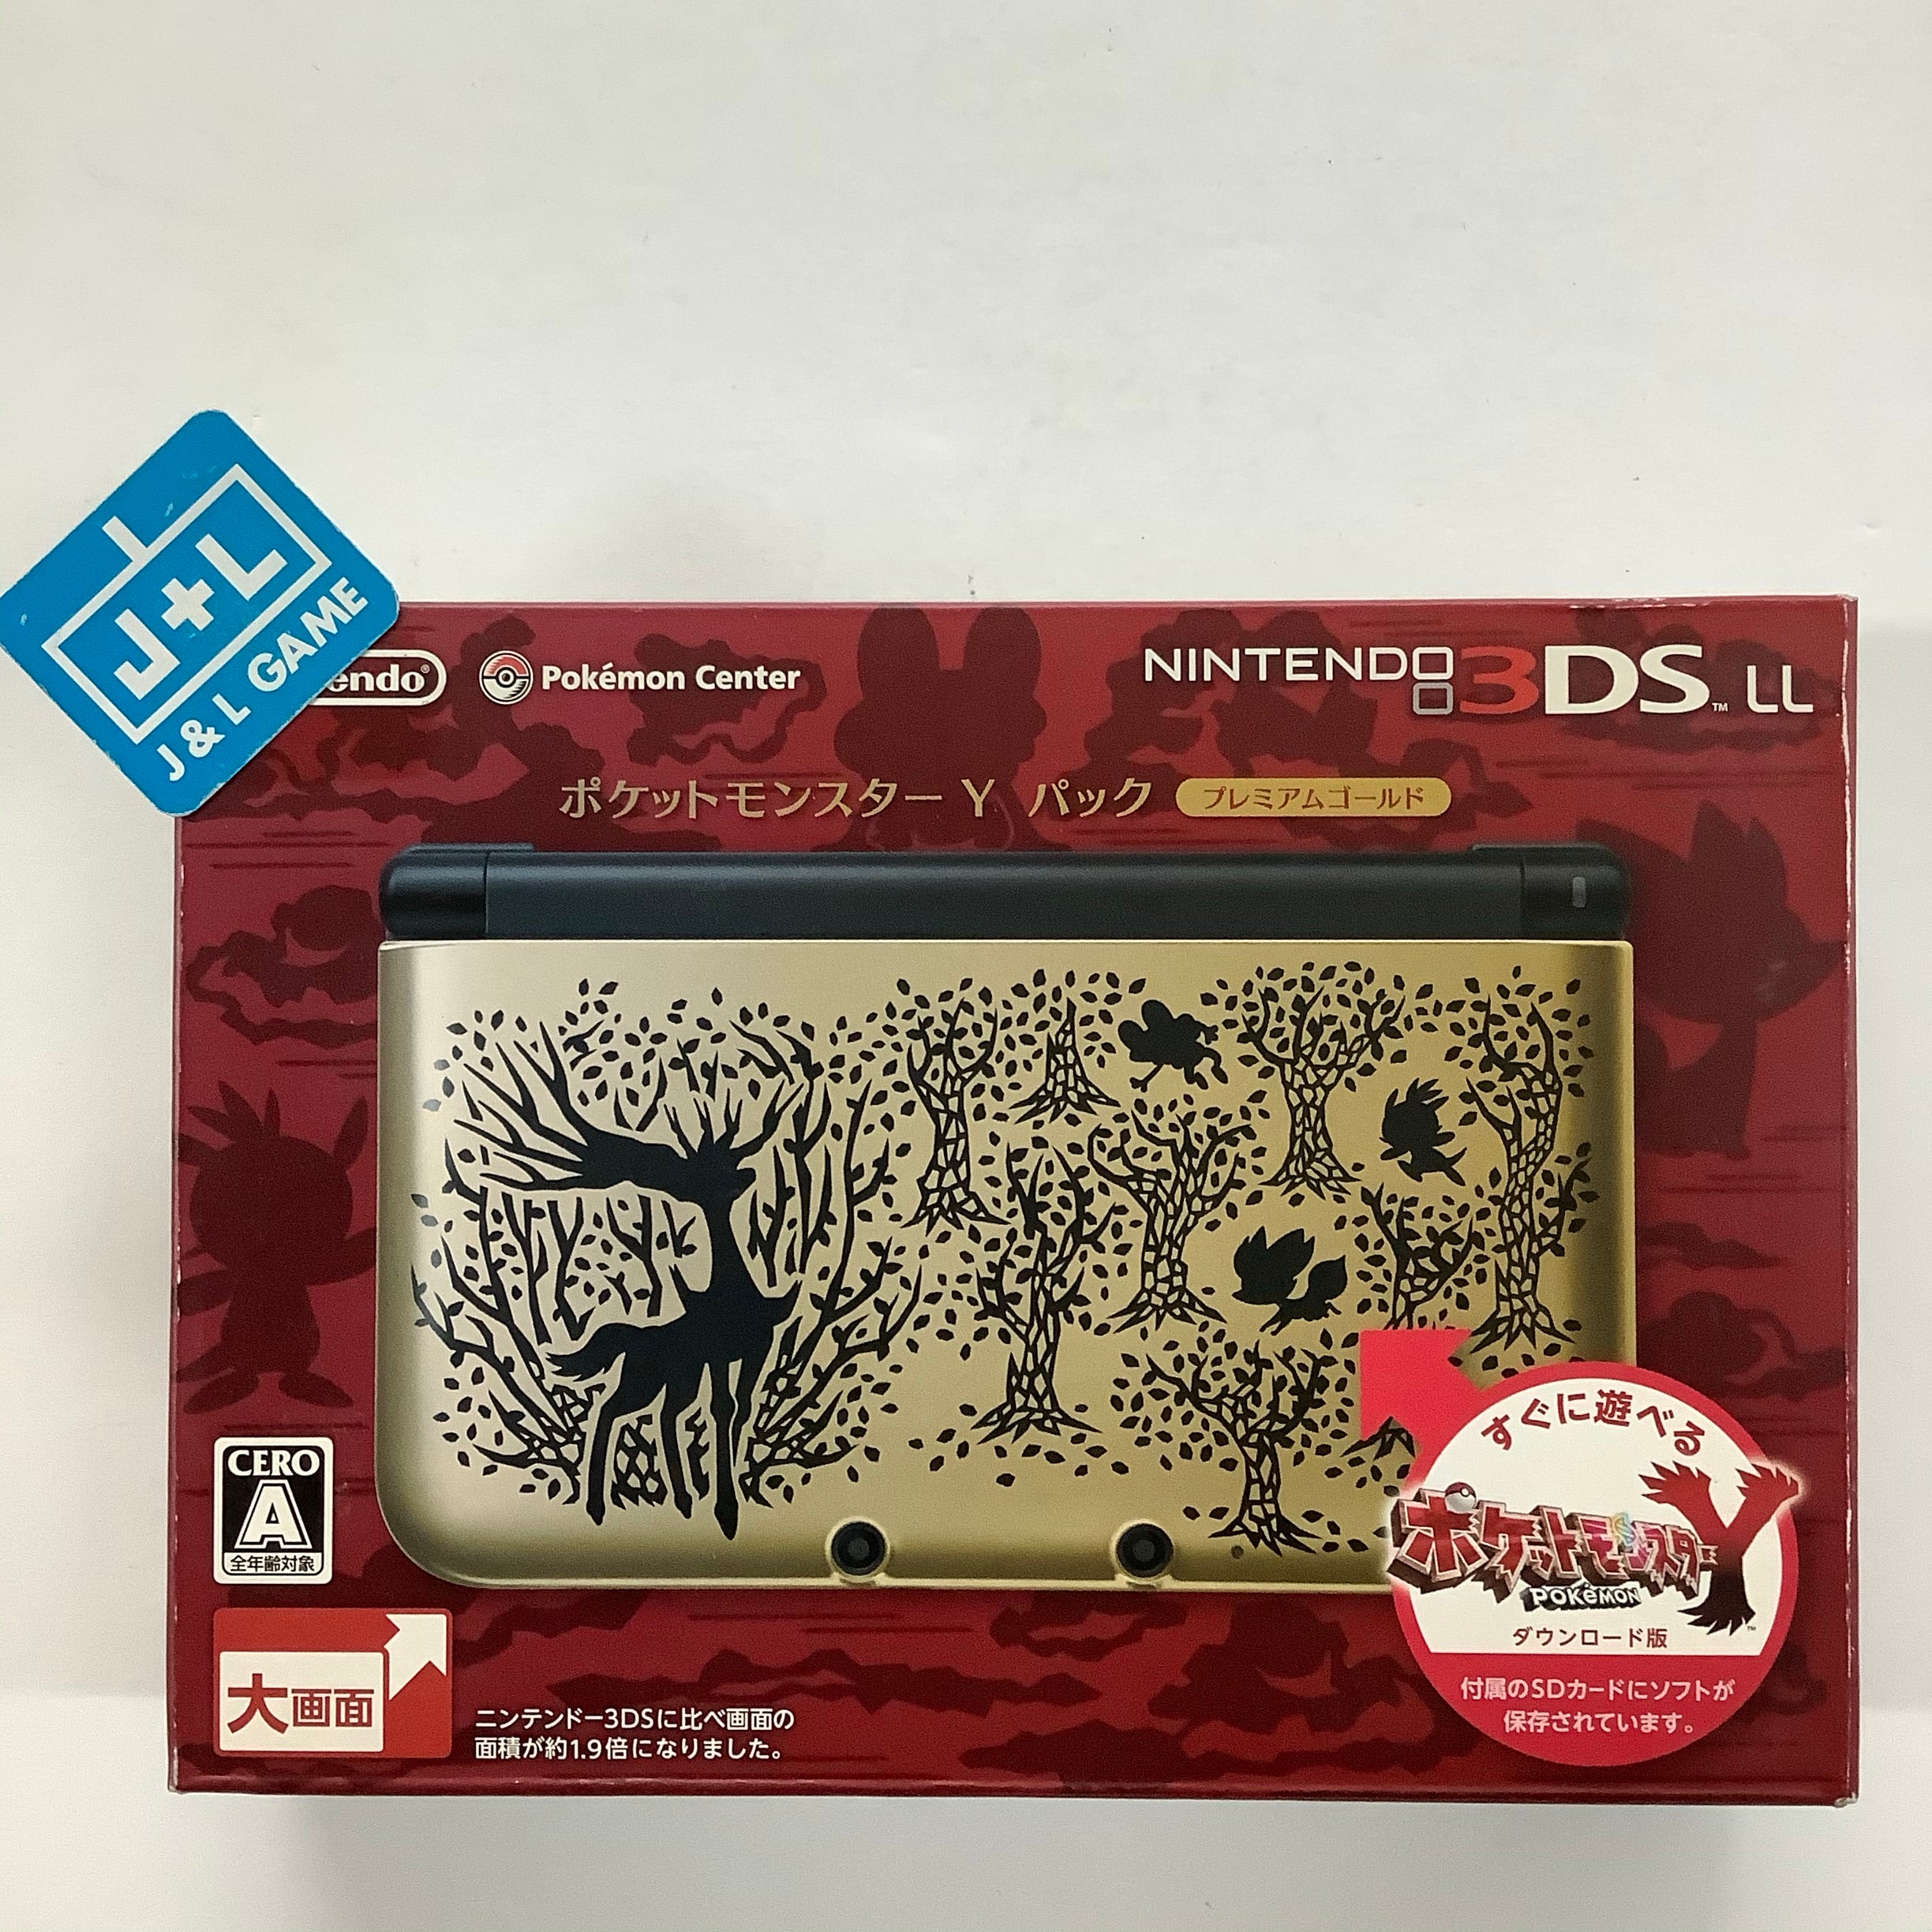 Nintendo 3ds LL Pocket Monsters Y Pack Premium Gold (Limited Edition) -  (3DS) Nintendo 3DS ( Japanese Import )